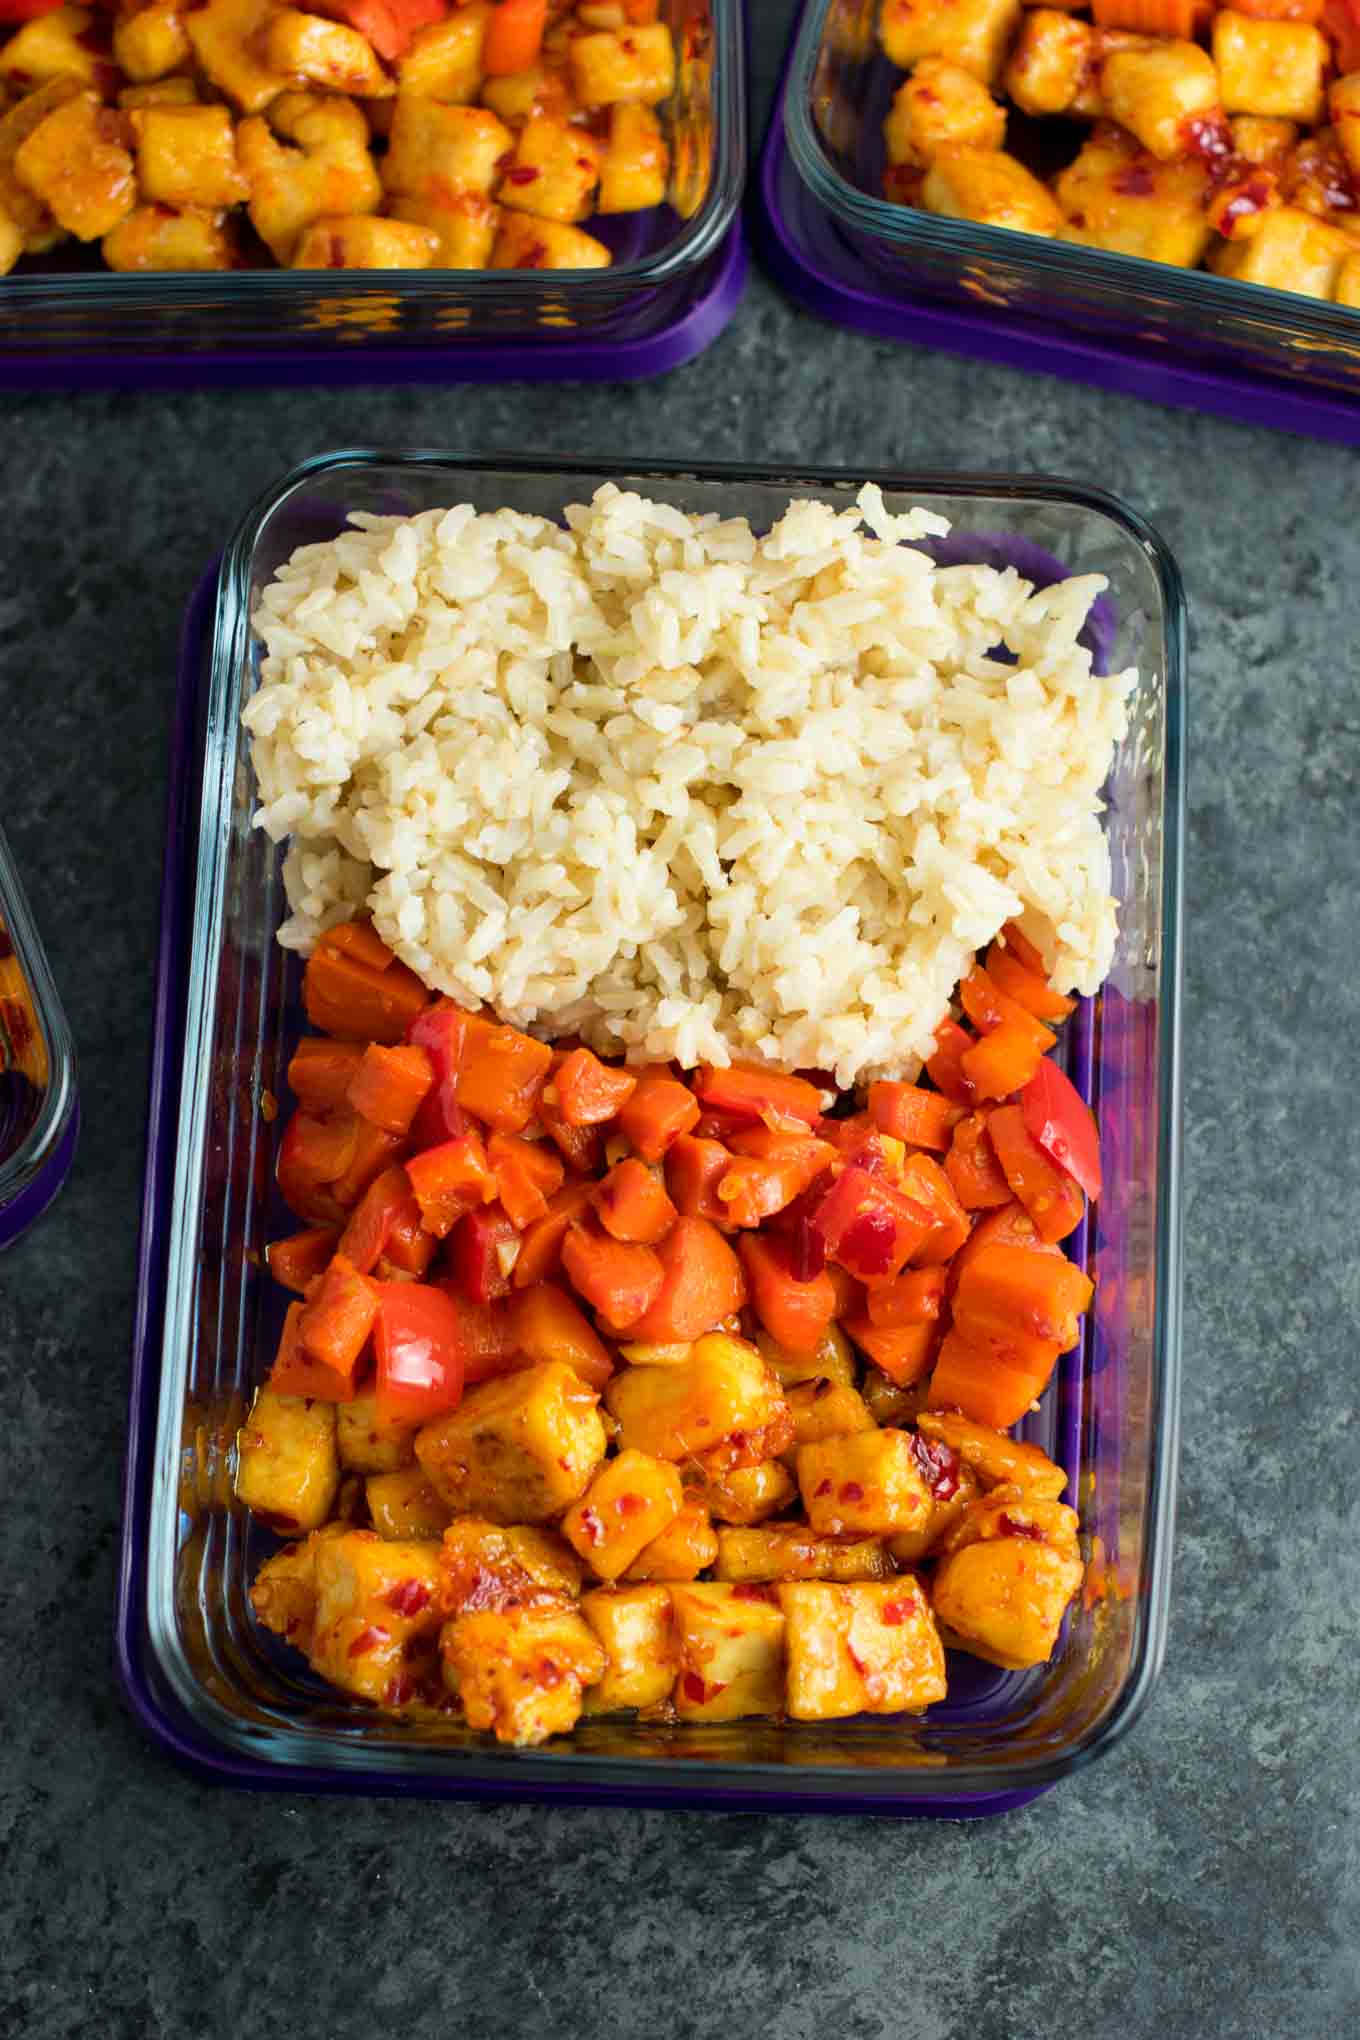 Meal Prep Sweet Chili Tofu Bowls with brown rice and vegetables. A delicious vegan or vegetarian meal! #vegan #vegetarian #veganmealprep #tofu